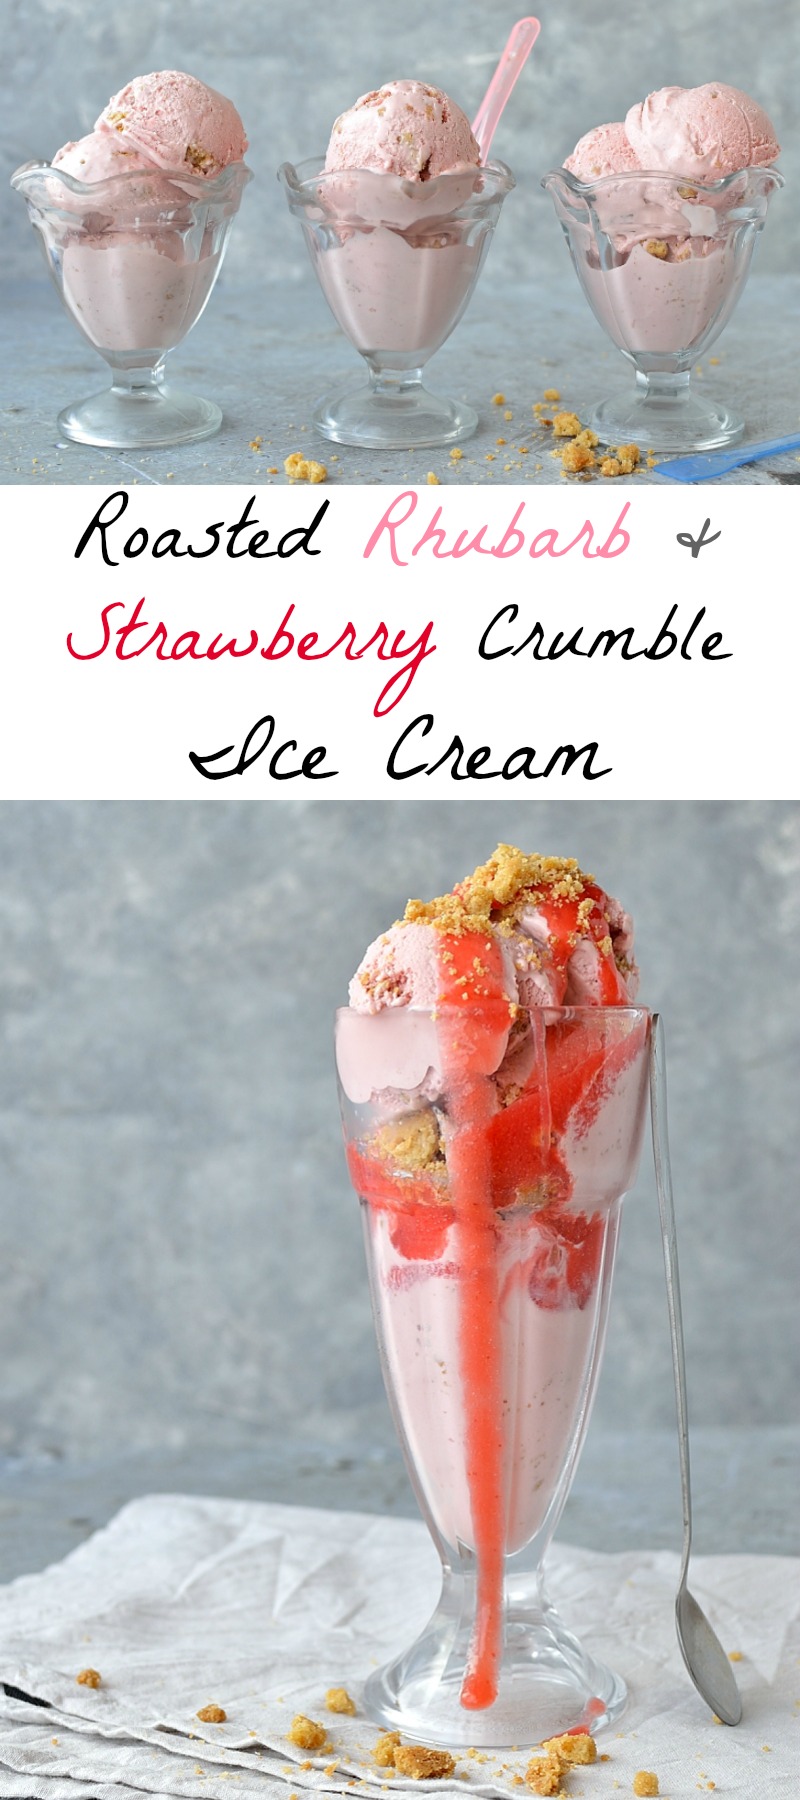 Roasted rhubarb and strawberry crumble ice cream - sweet, creamy, fruity ice cream filled with chunks of crisp, buttery crumble. The perfect ice cream for Spring!